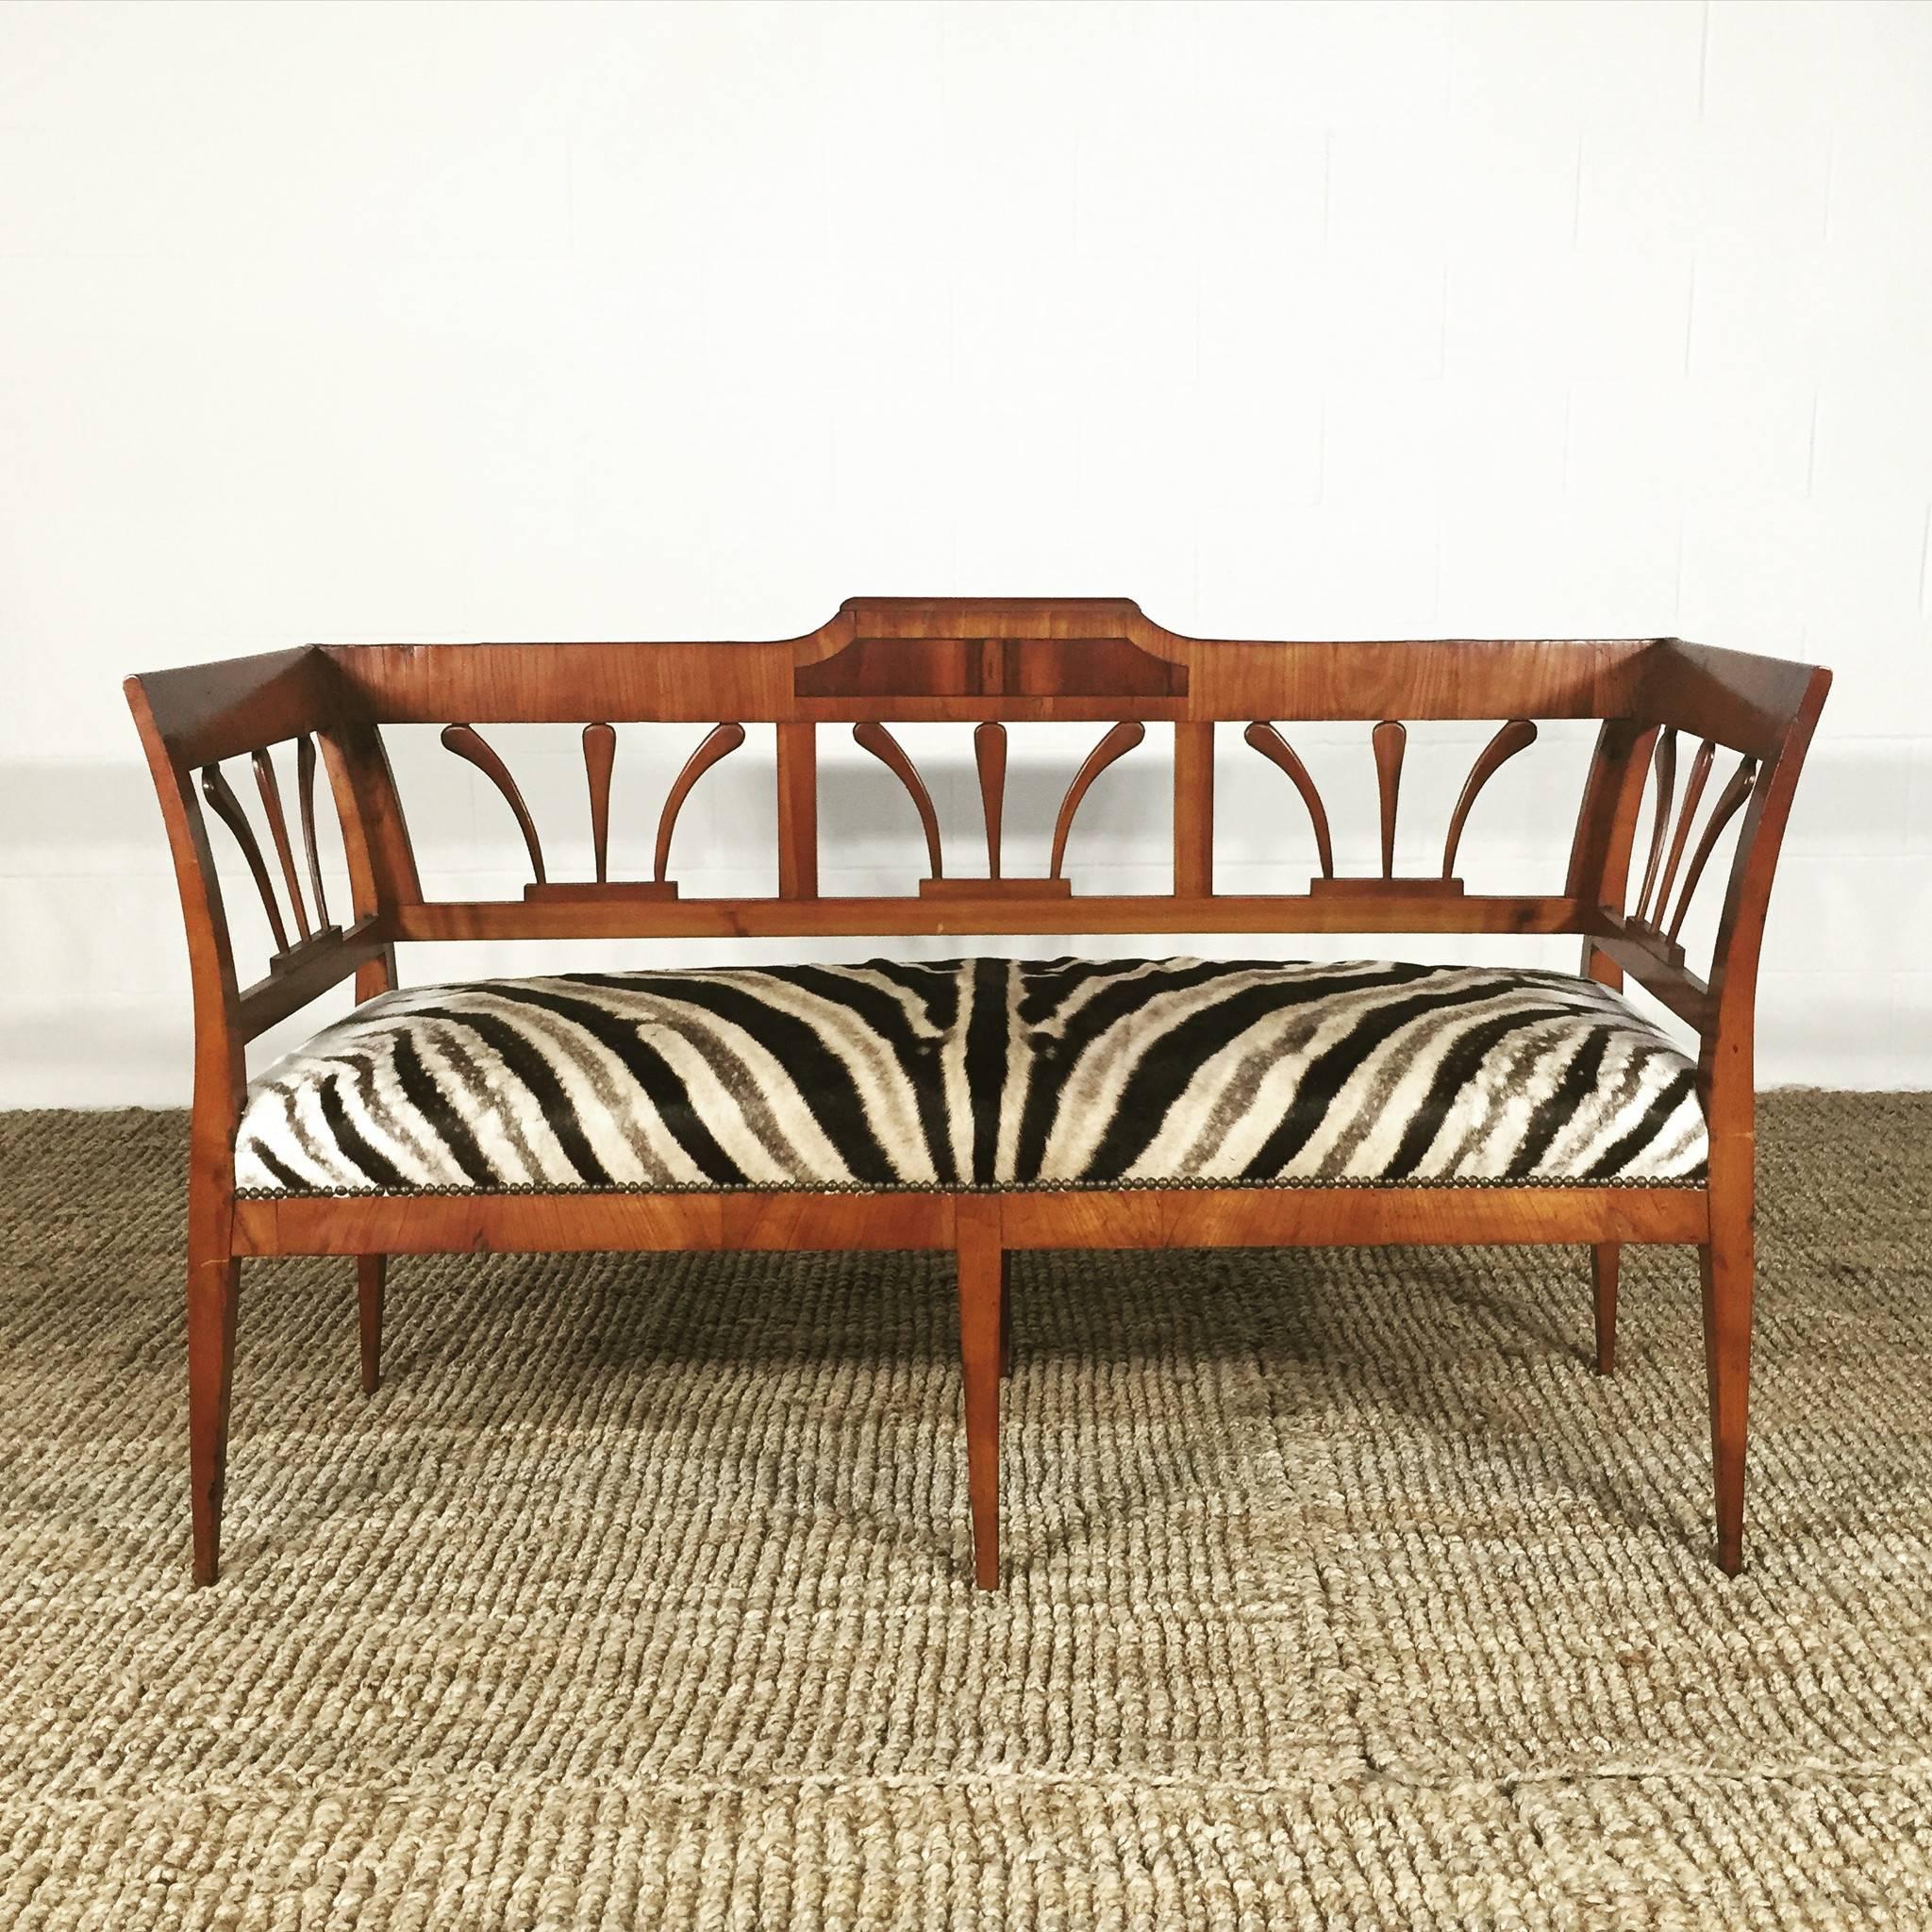 19th Century Fruitwood and Rosewood Settee in Zebra Hide with Zebra Pillows 1